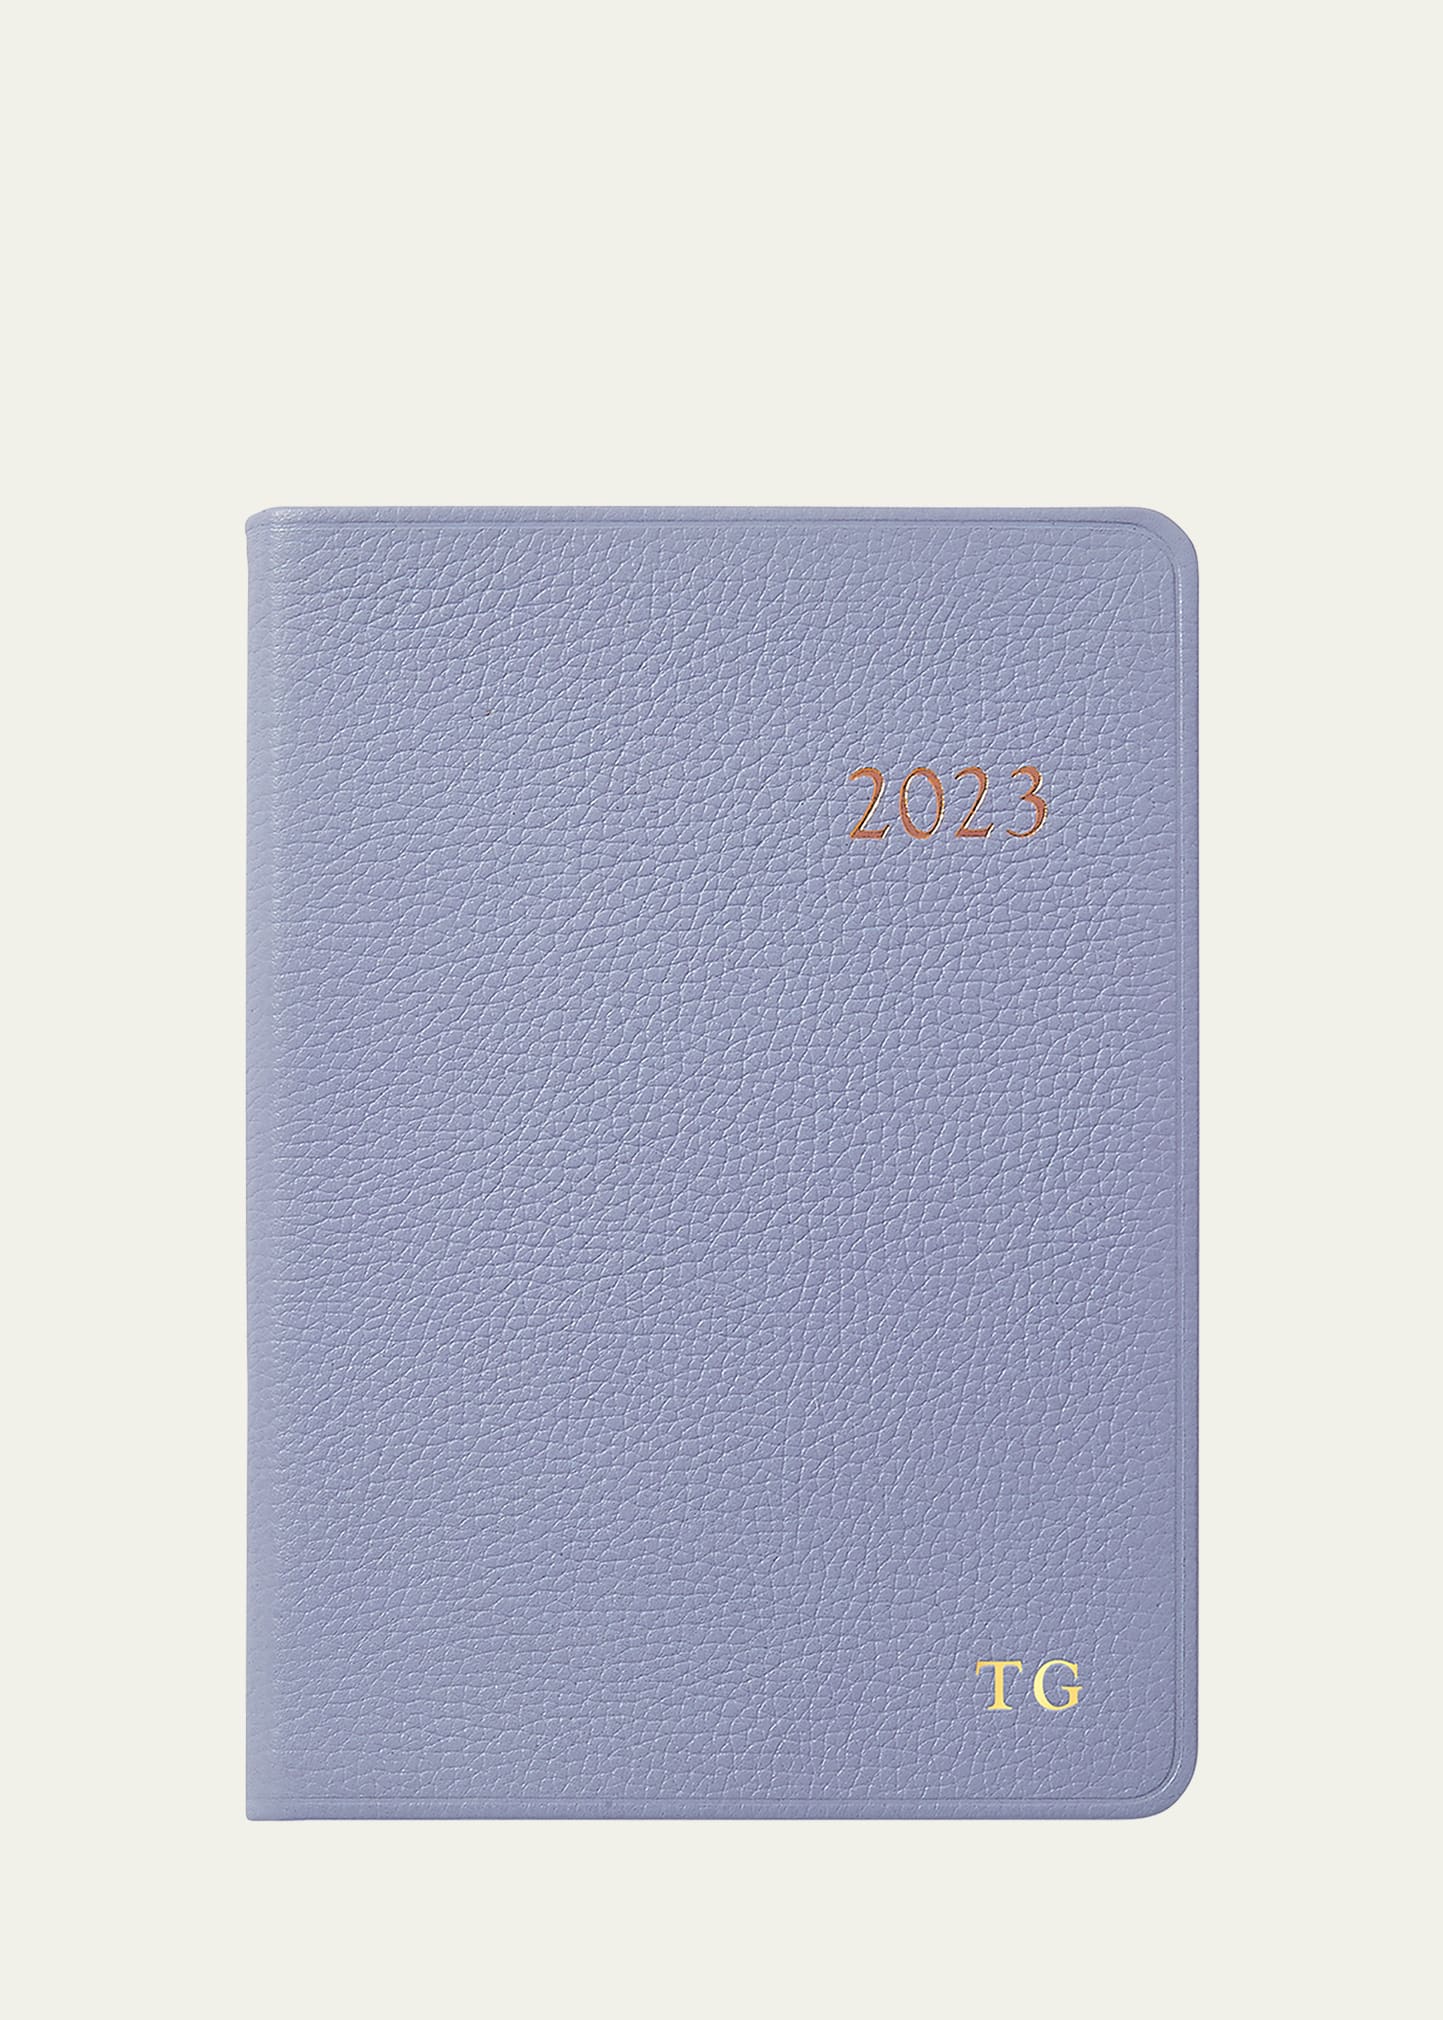 Graphic Image 2023 Notebook - Personalized